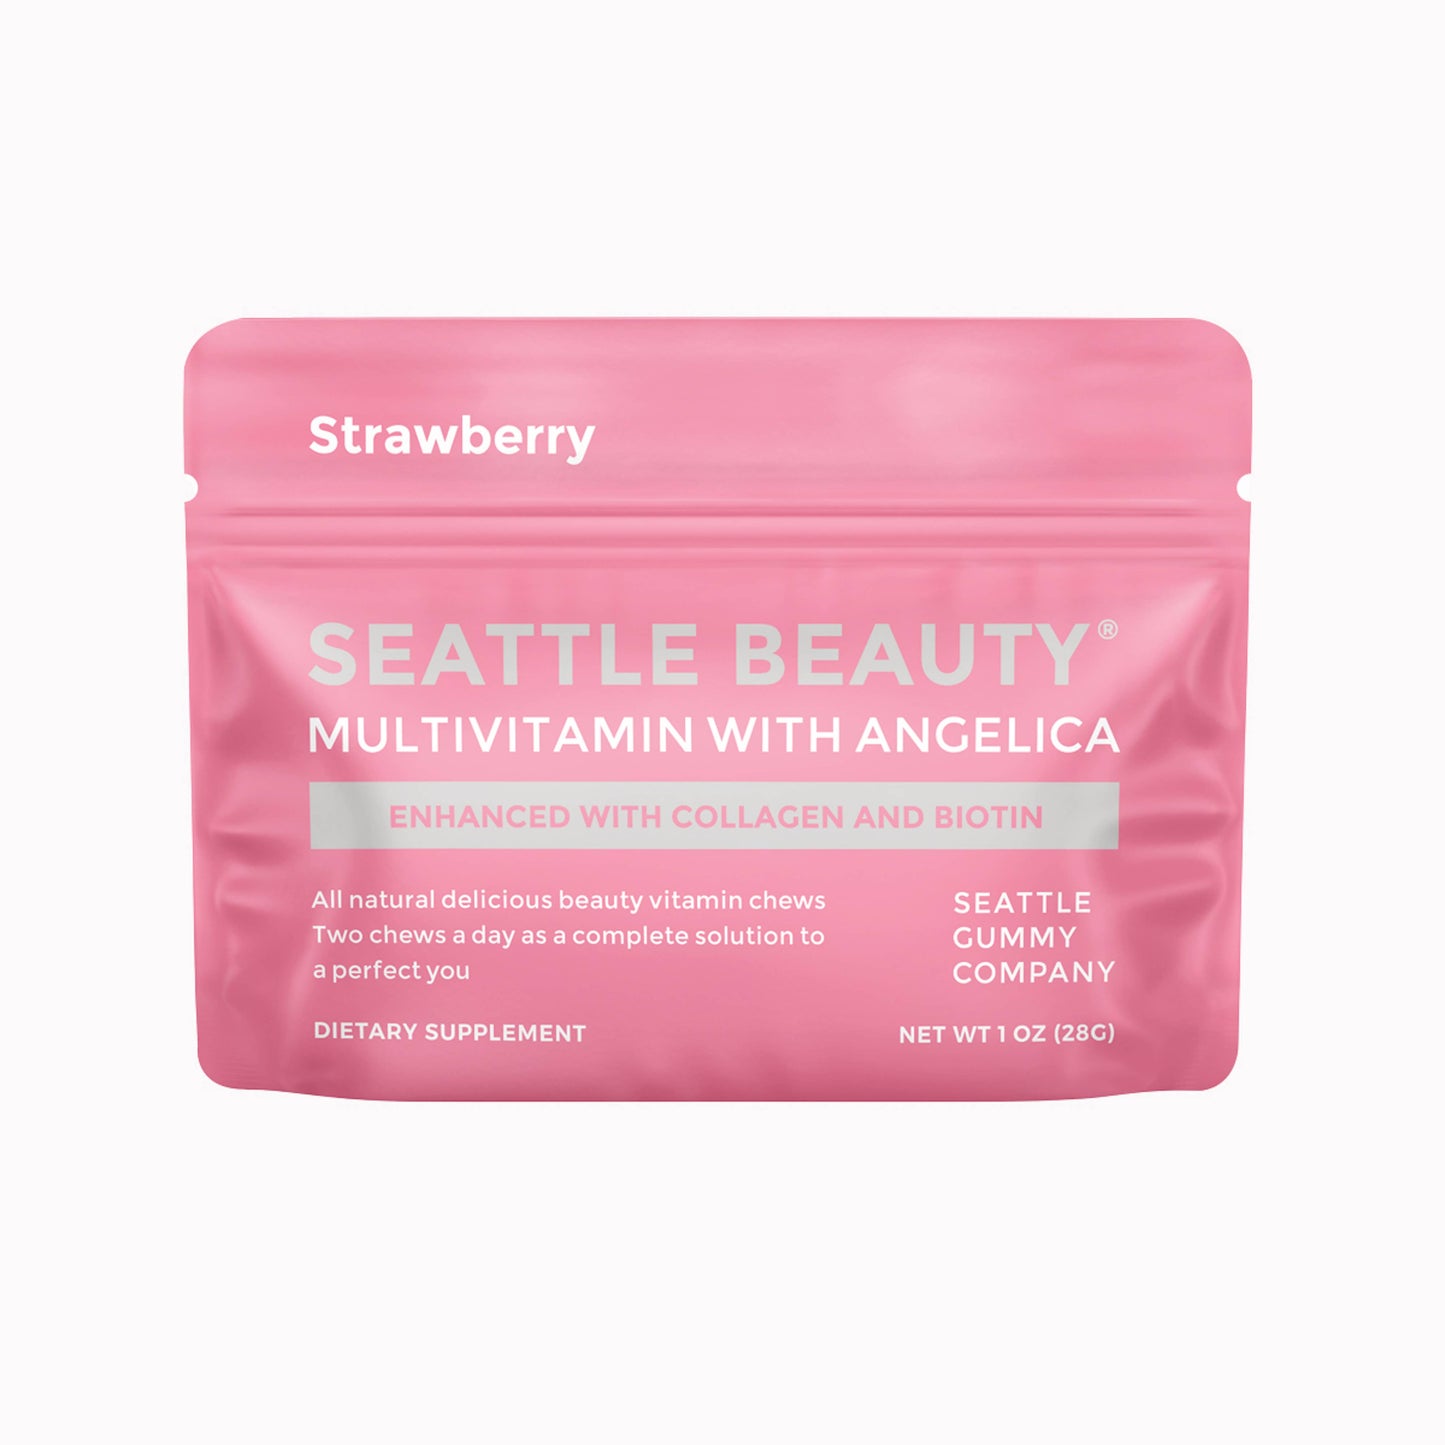 Beauty Gummy Multivitamin with Angelica |12-pack,Strawberry